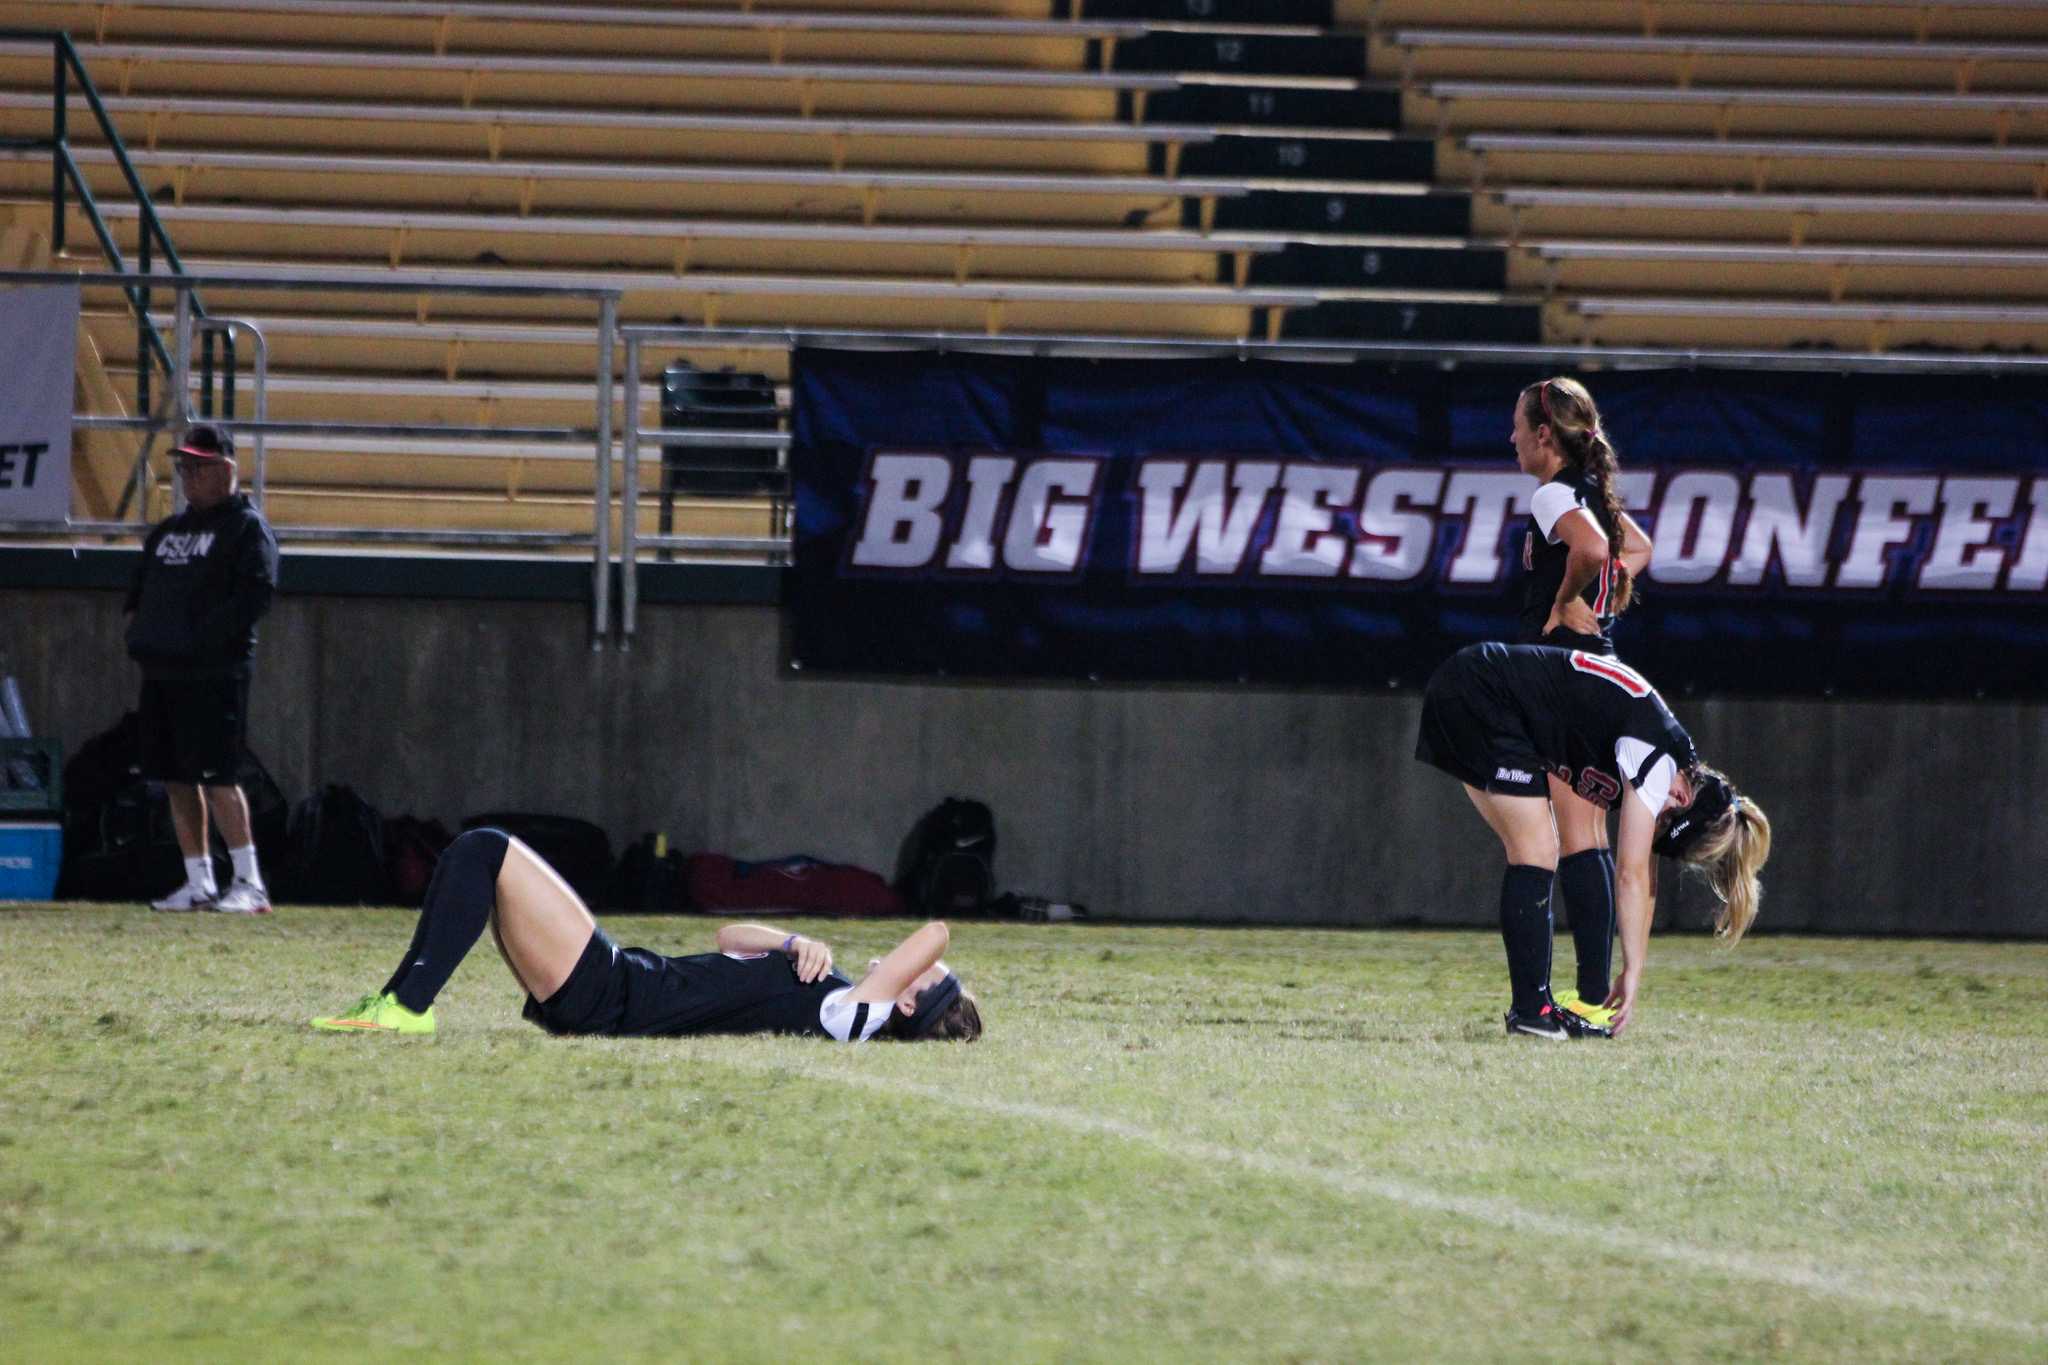 CSUN soccer player taking a break from a game as they prepare to continue to play.